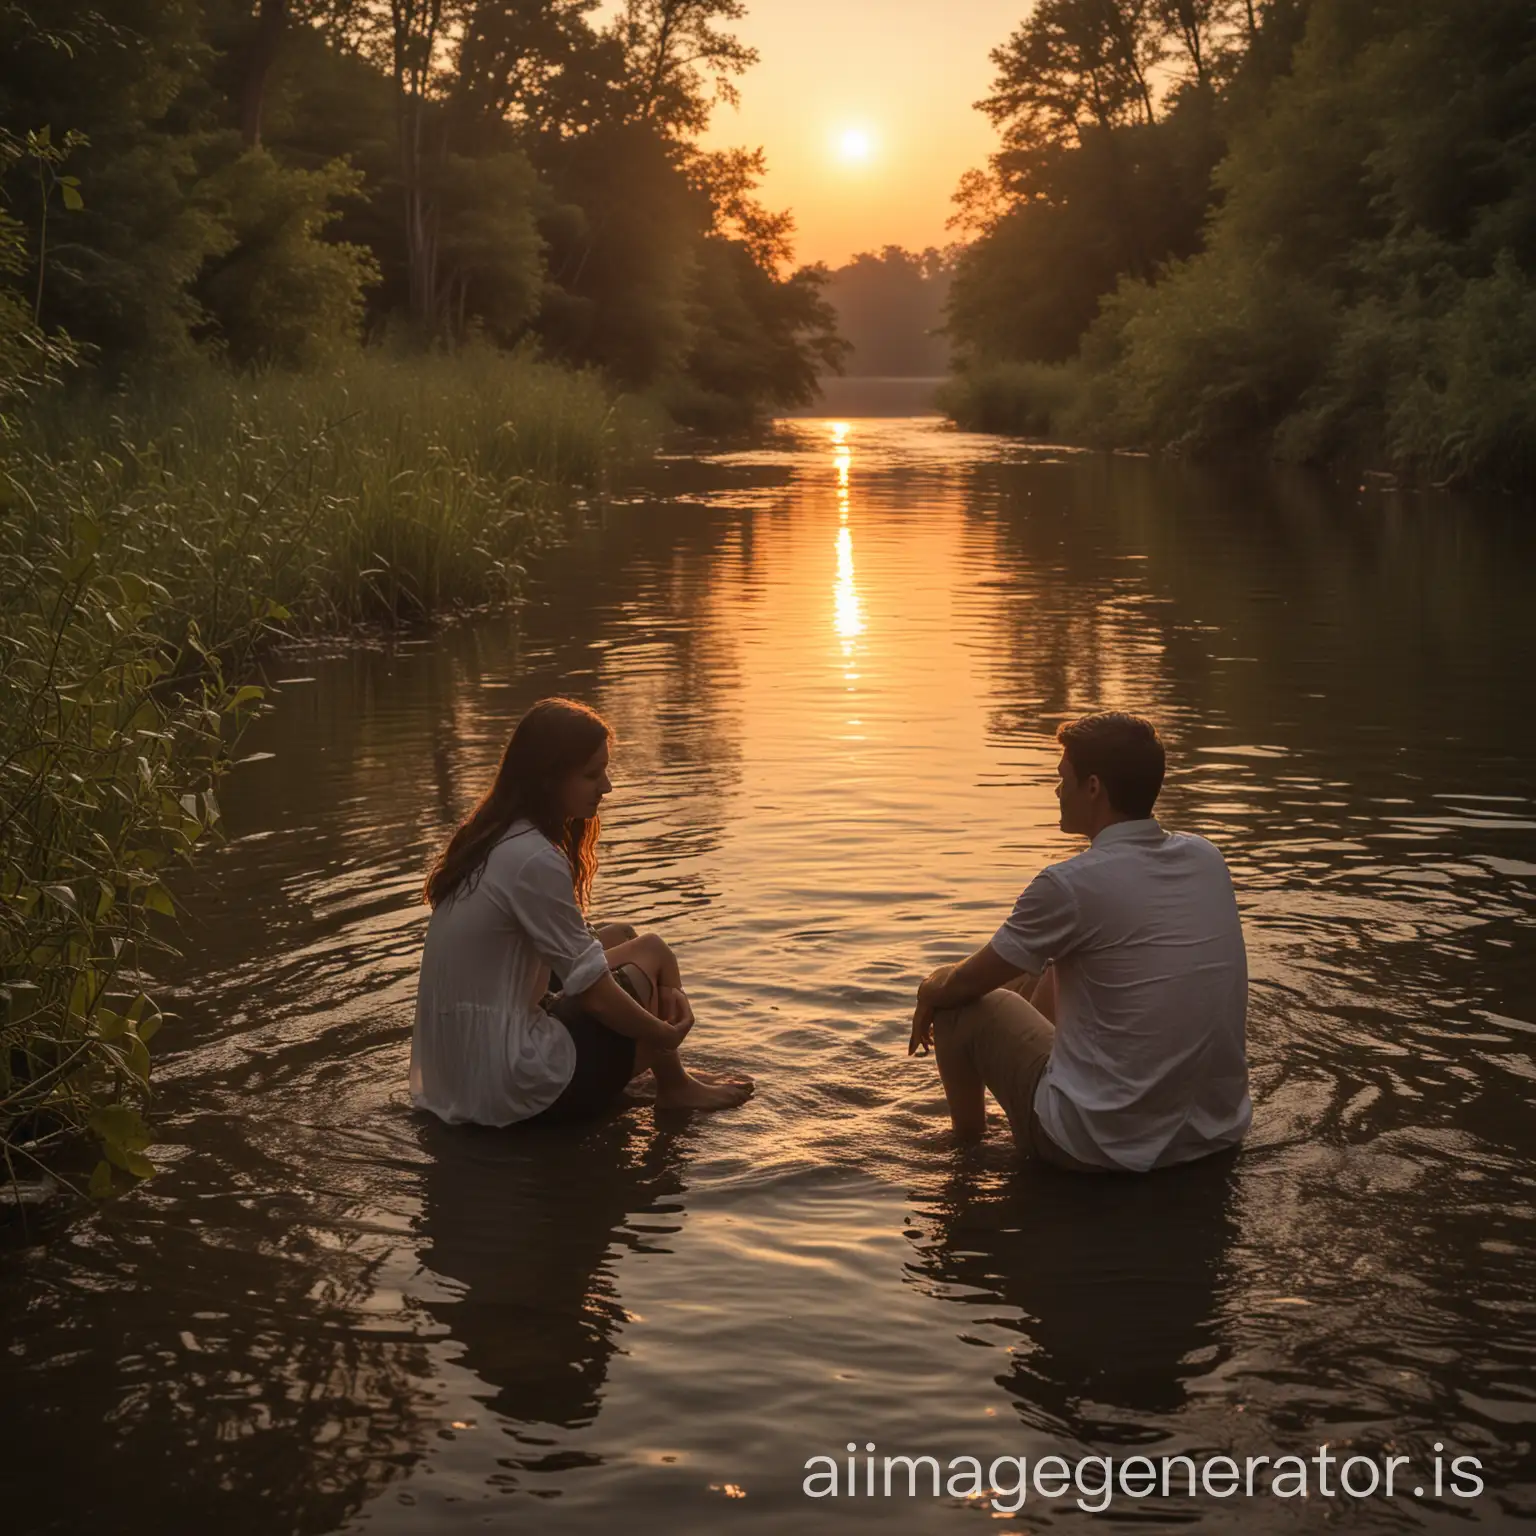 Under the soft glow of the setting sun, a young couple sat on the riverbank, facing each other. Their eyes met in a tender gaze as they spoke softly, sharing their dreams and secrets. The gentle flow of the river beside them added a soothing rhythm to their heartfelt conversation. In this quiet moment, with the world fading away, their connection was clear and strong, a testament to the deep love and understanding they shared.